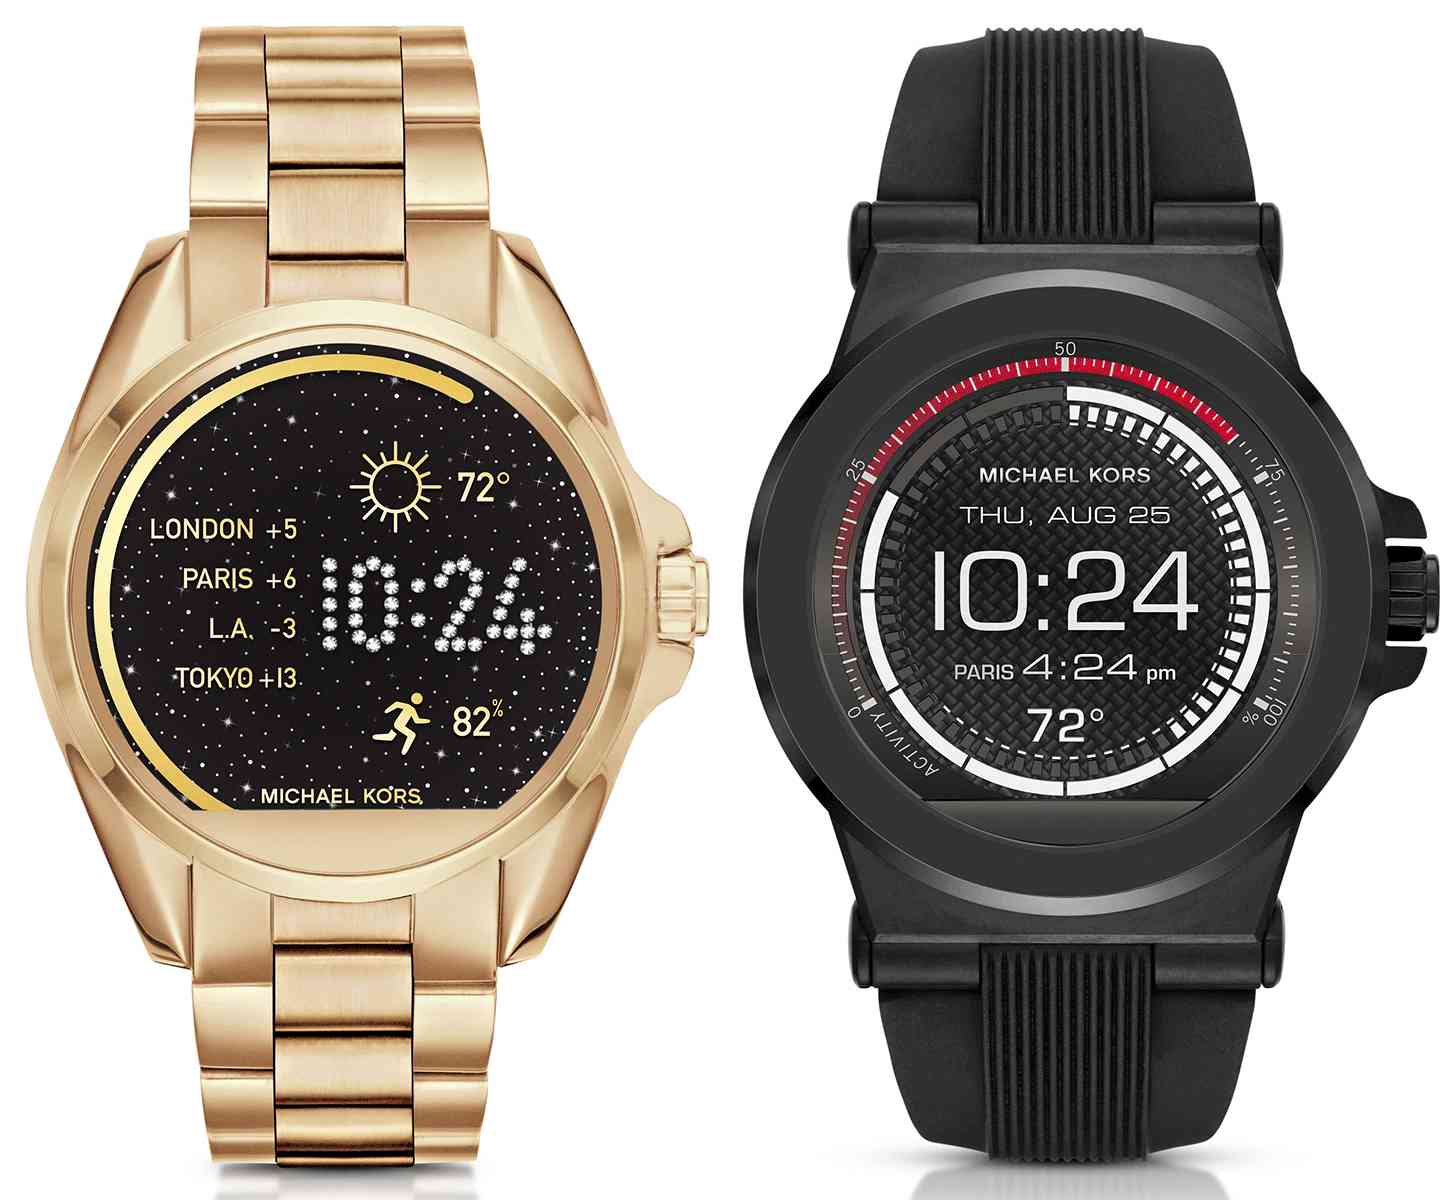 Michael Kors Bradshaw, Dylan Android Wear smartwatches